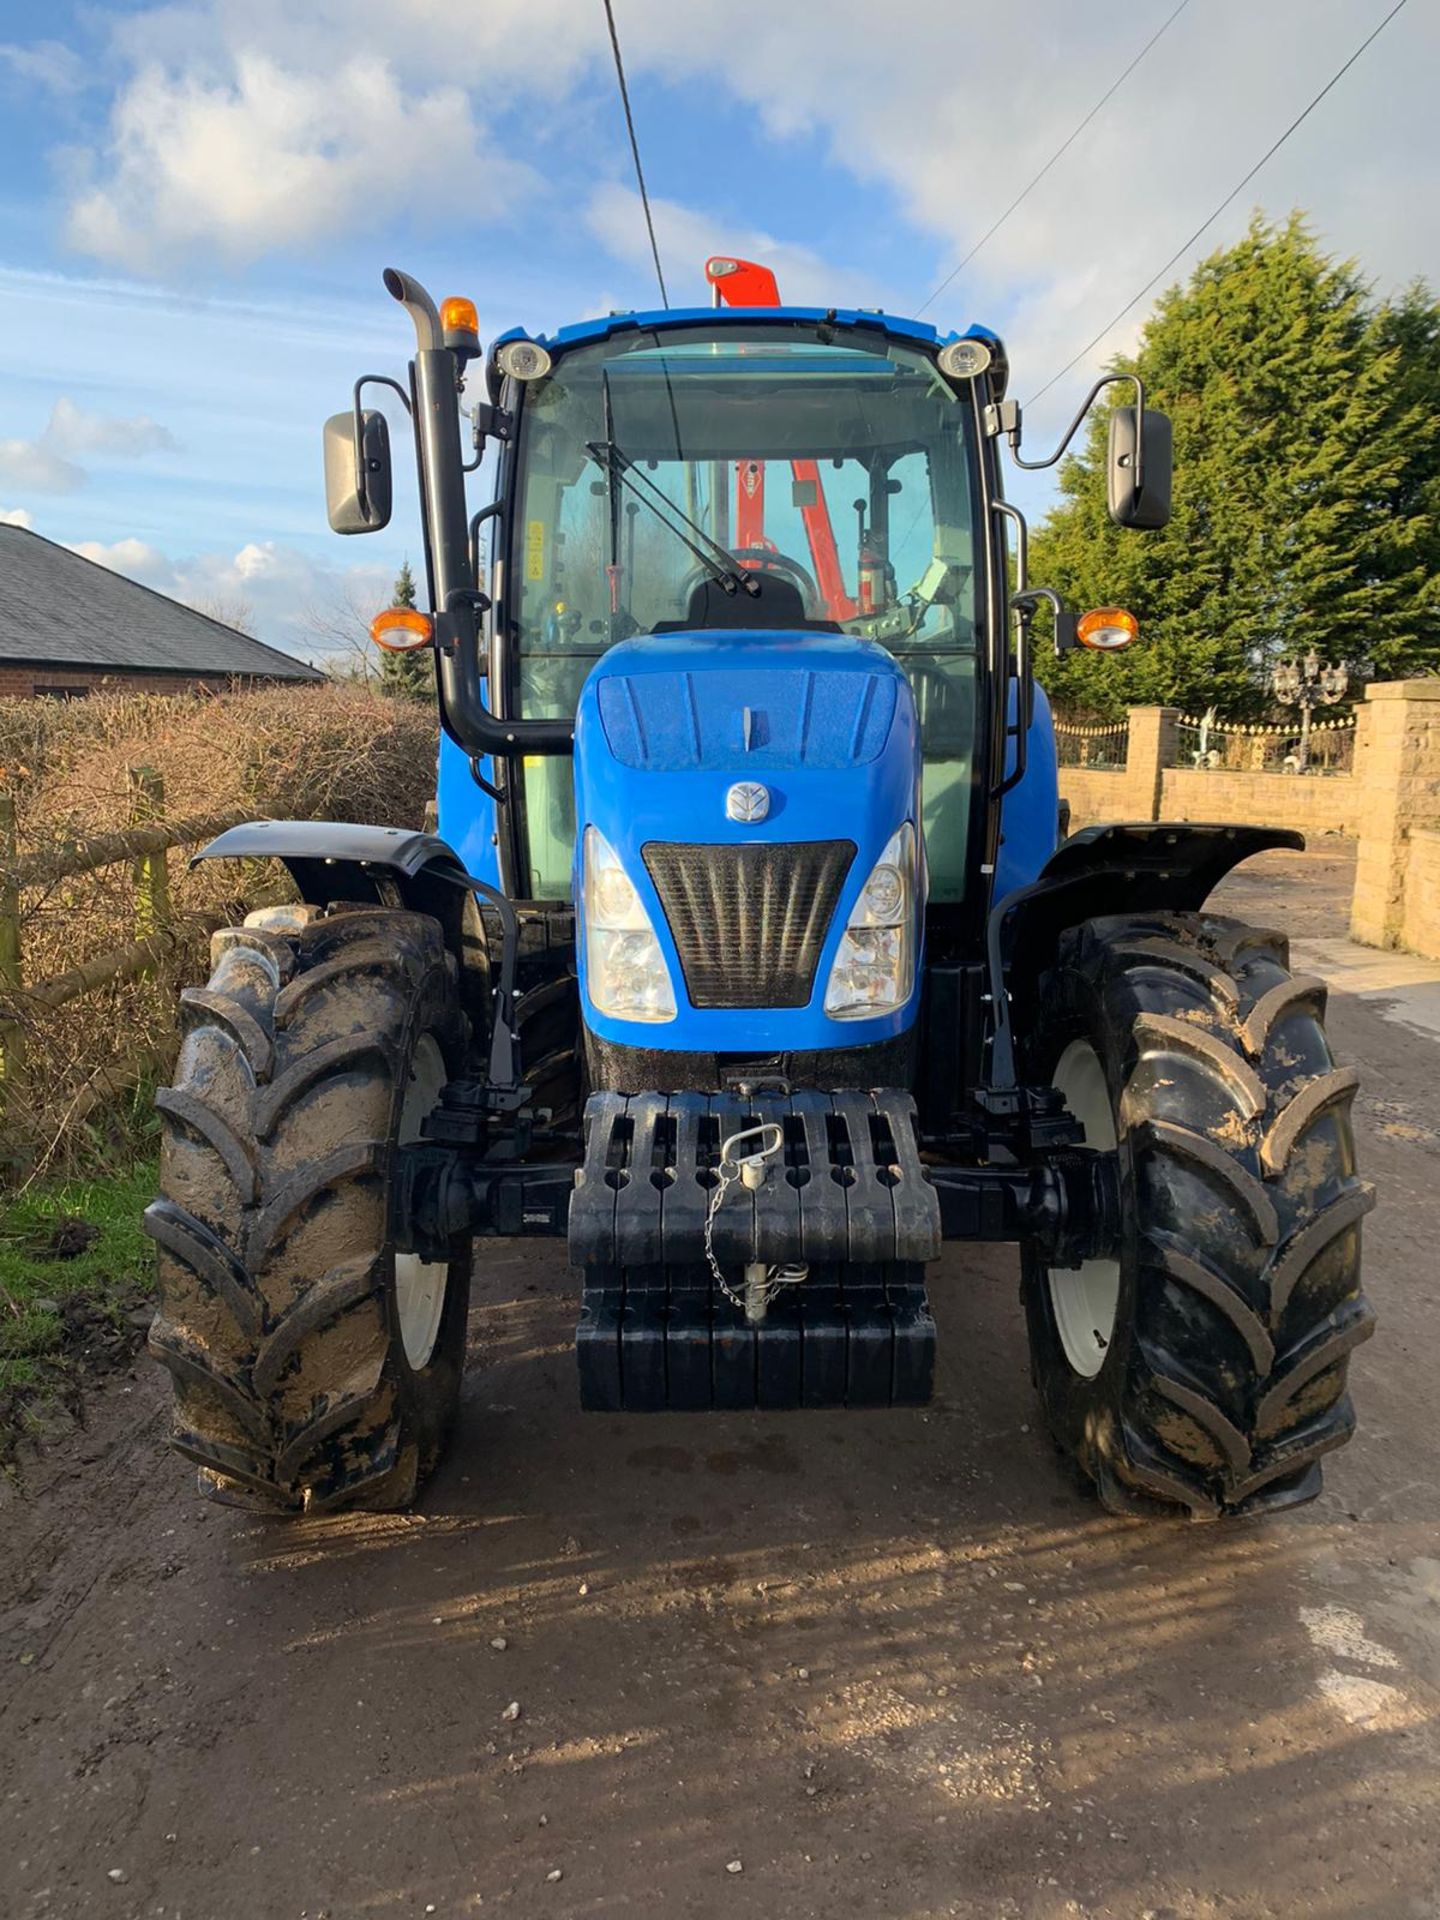 2017/67 REG NEW HOLLAND T4.85 4WD DIESEL TRACTOR, FULL GLASS CAB, HEDGECUTTER SOLD SEPERATELY - Image 2 of 20